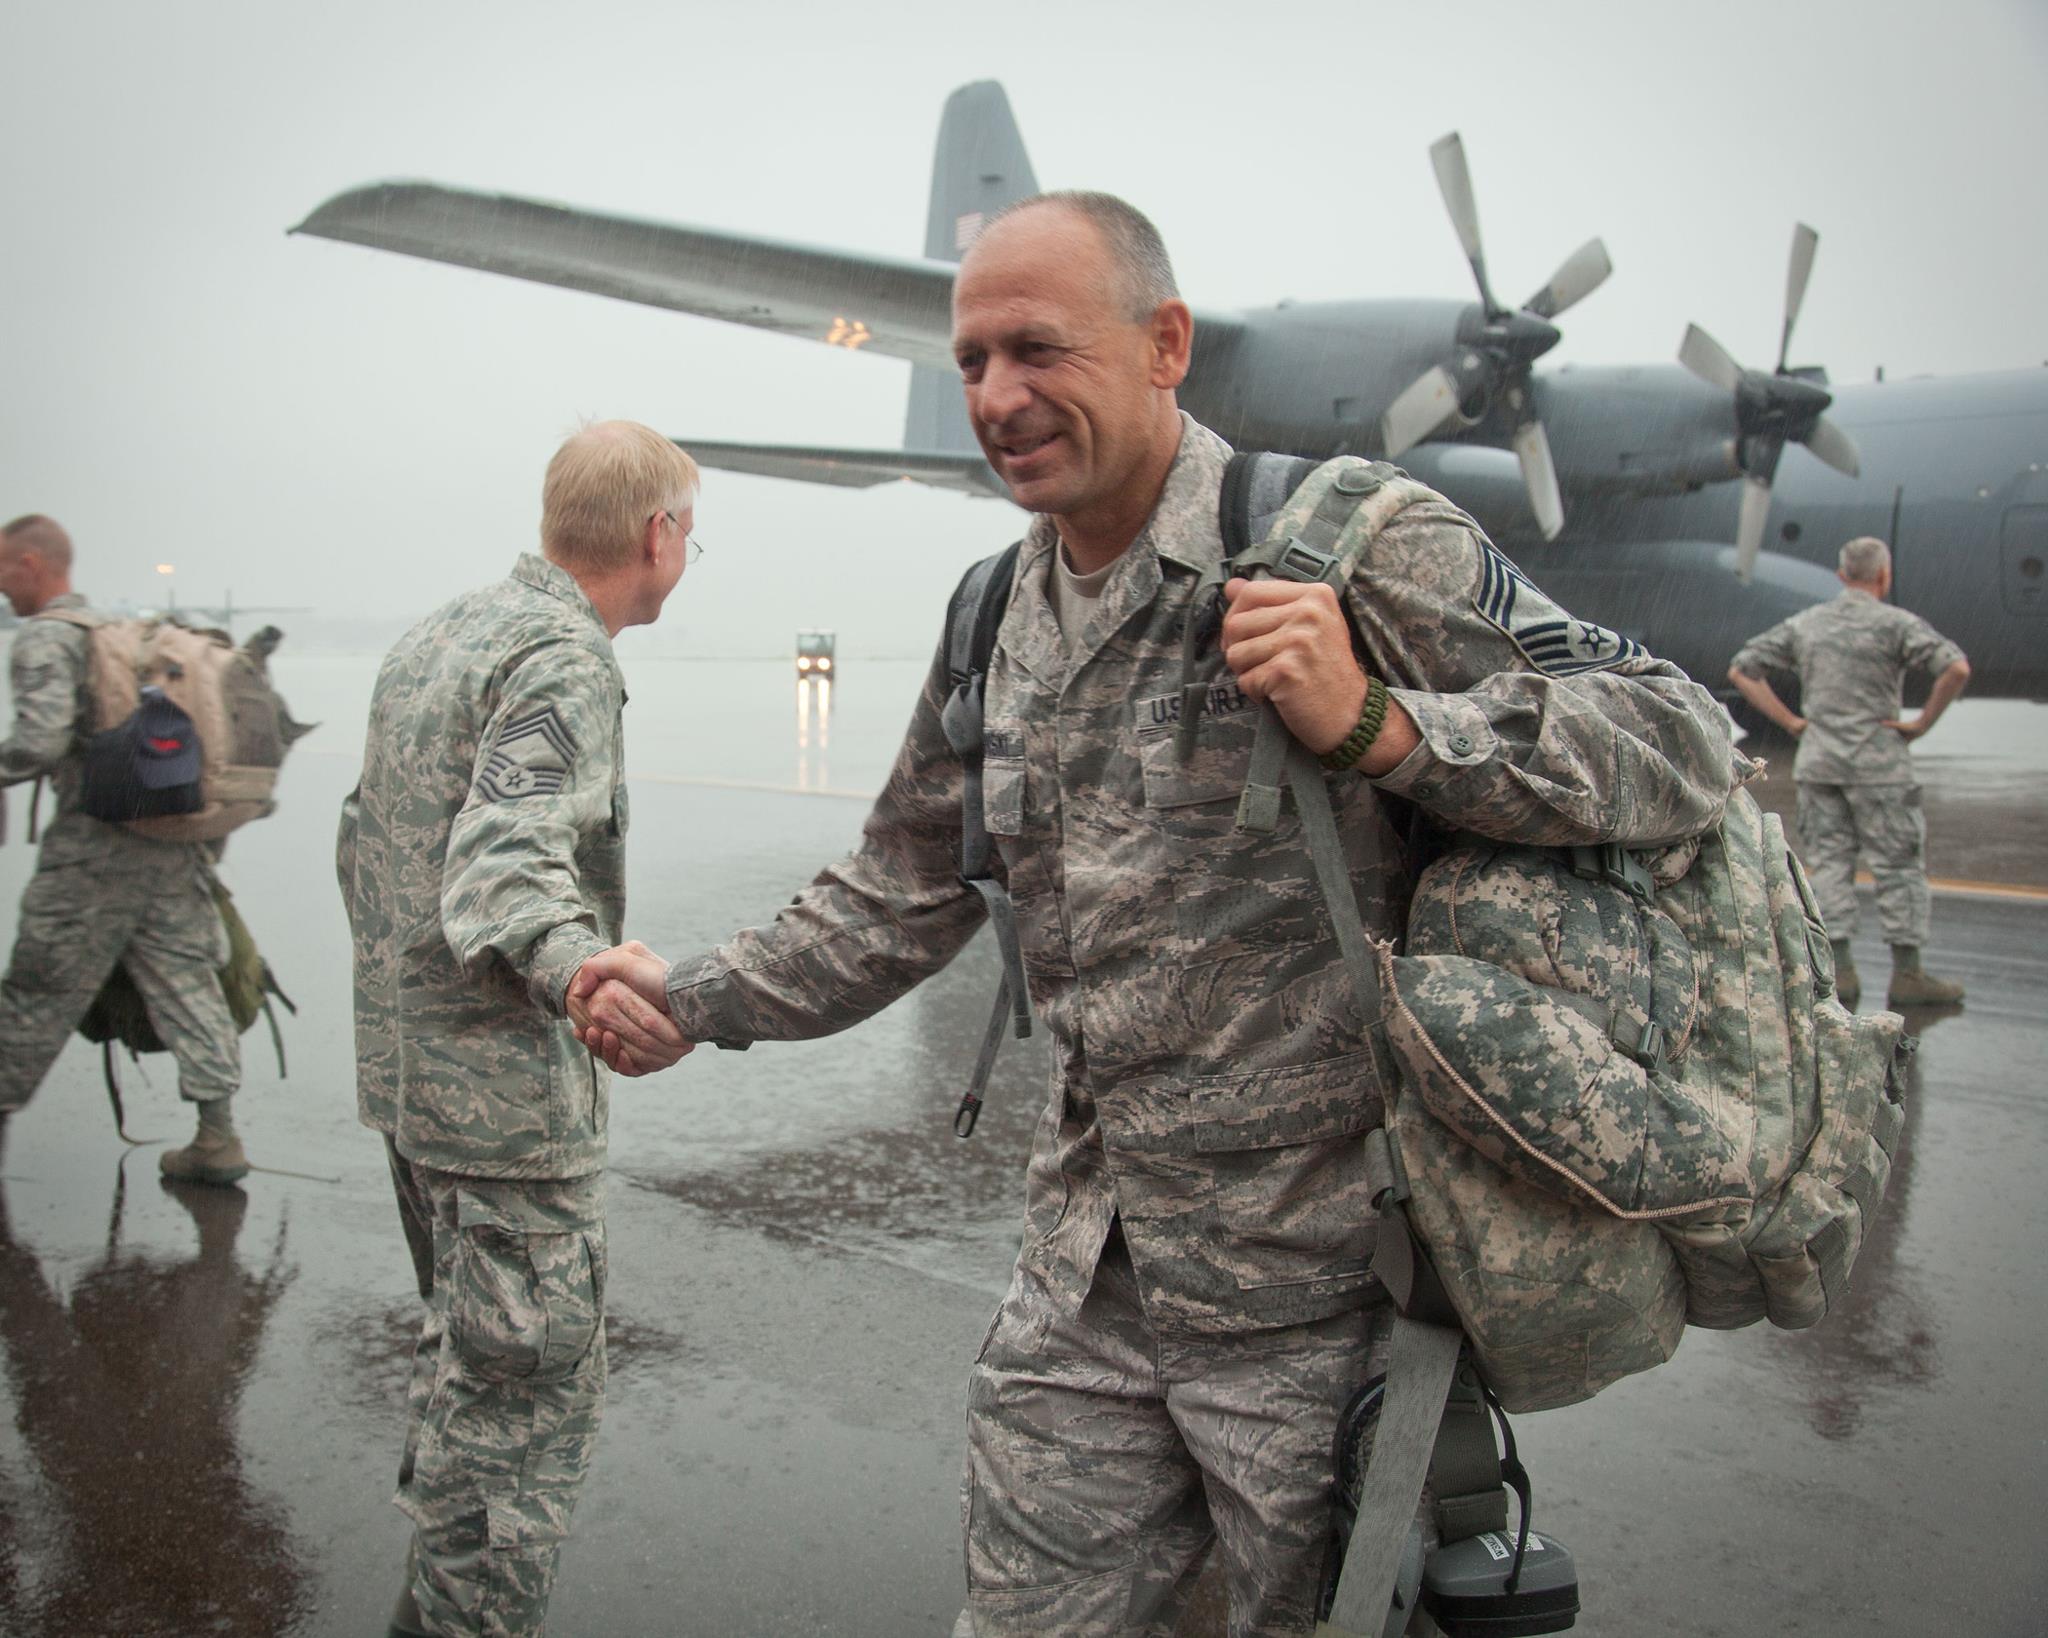 Even the rain cannot stop friends and families from reuniting with Airmen of the 934th Airlift Wing as they return from overseas. The Airmen have been deployed since early 2012 from the Minneapolis-St. Paul International Airport Air Reserve Station, Minn. (Shannon McKay)